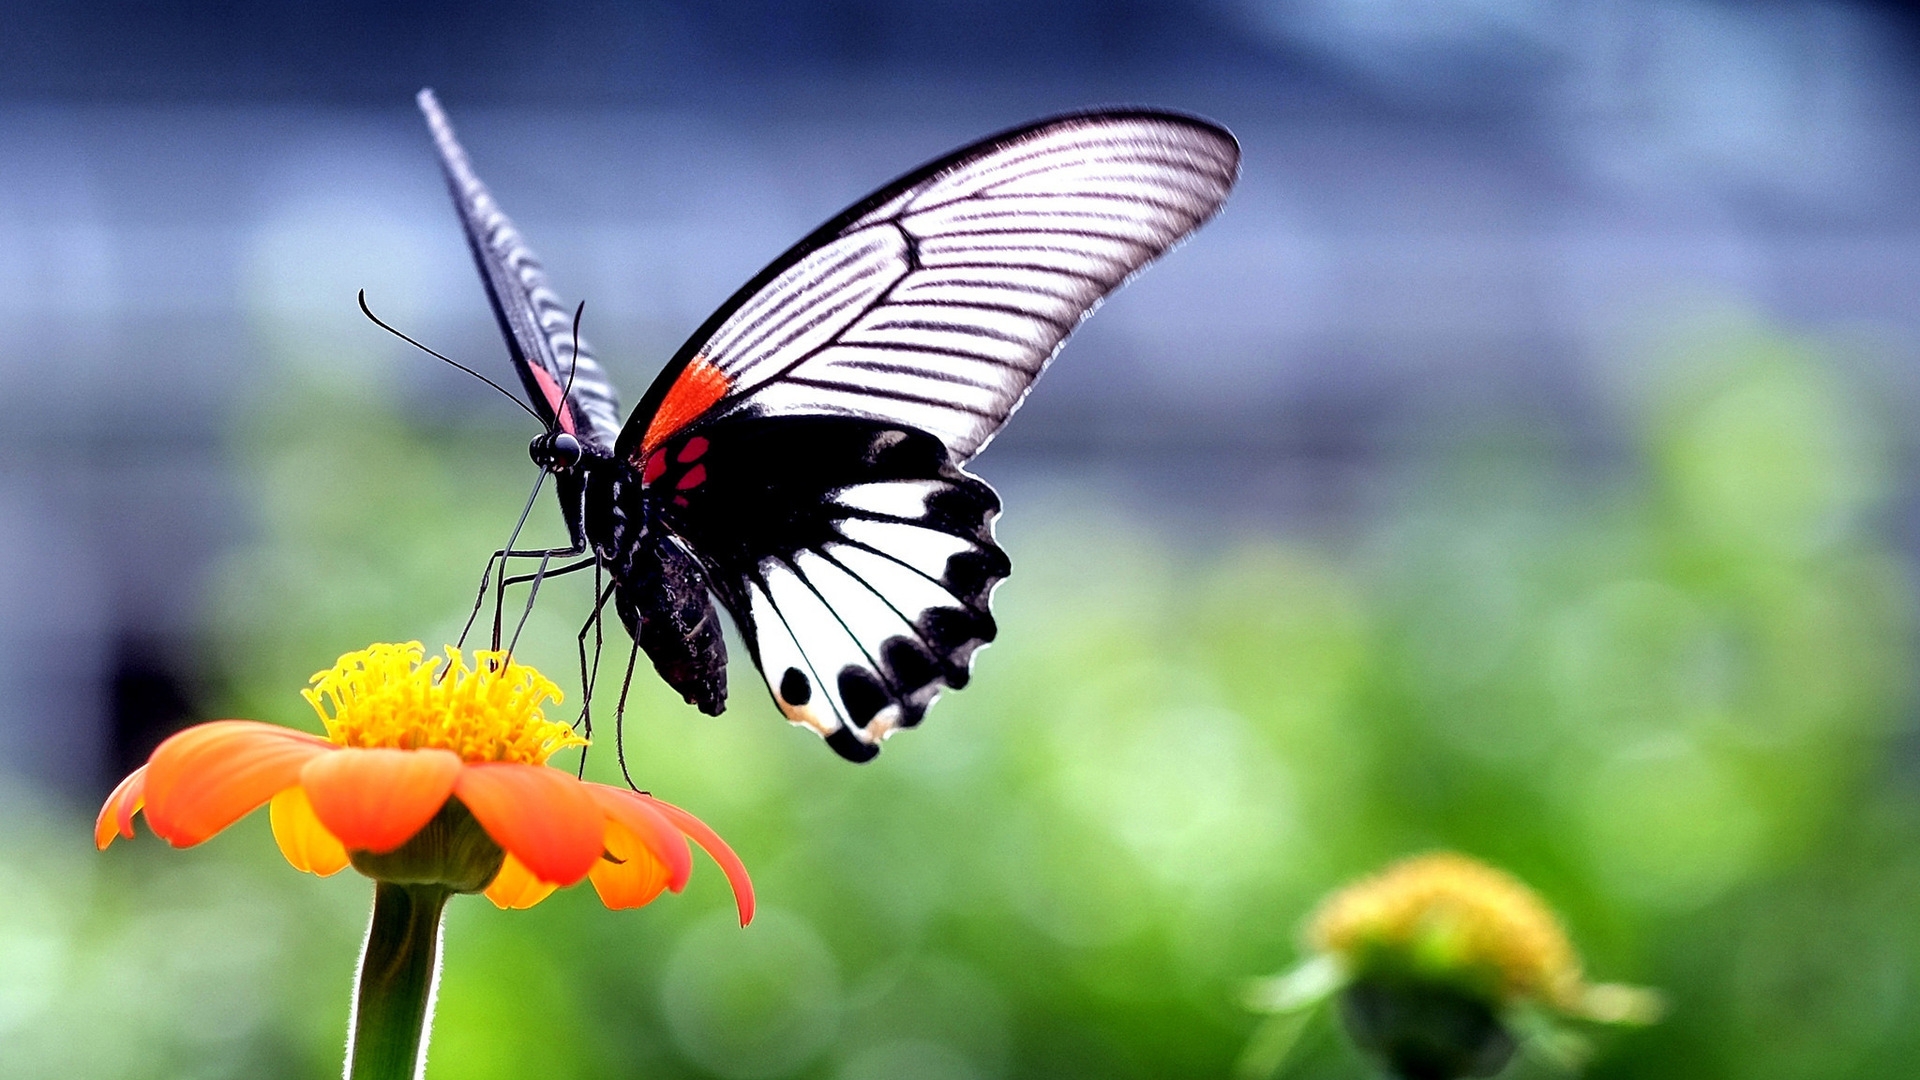 Beautiful Butterfly on Orange Flower for 1920 x 1080 HDTV 1080p resolution